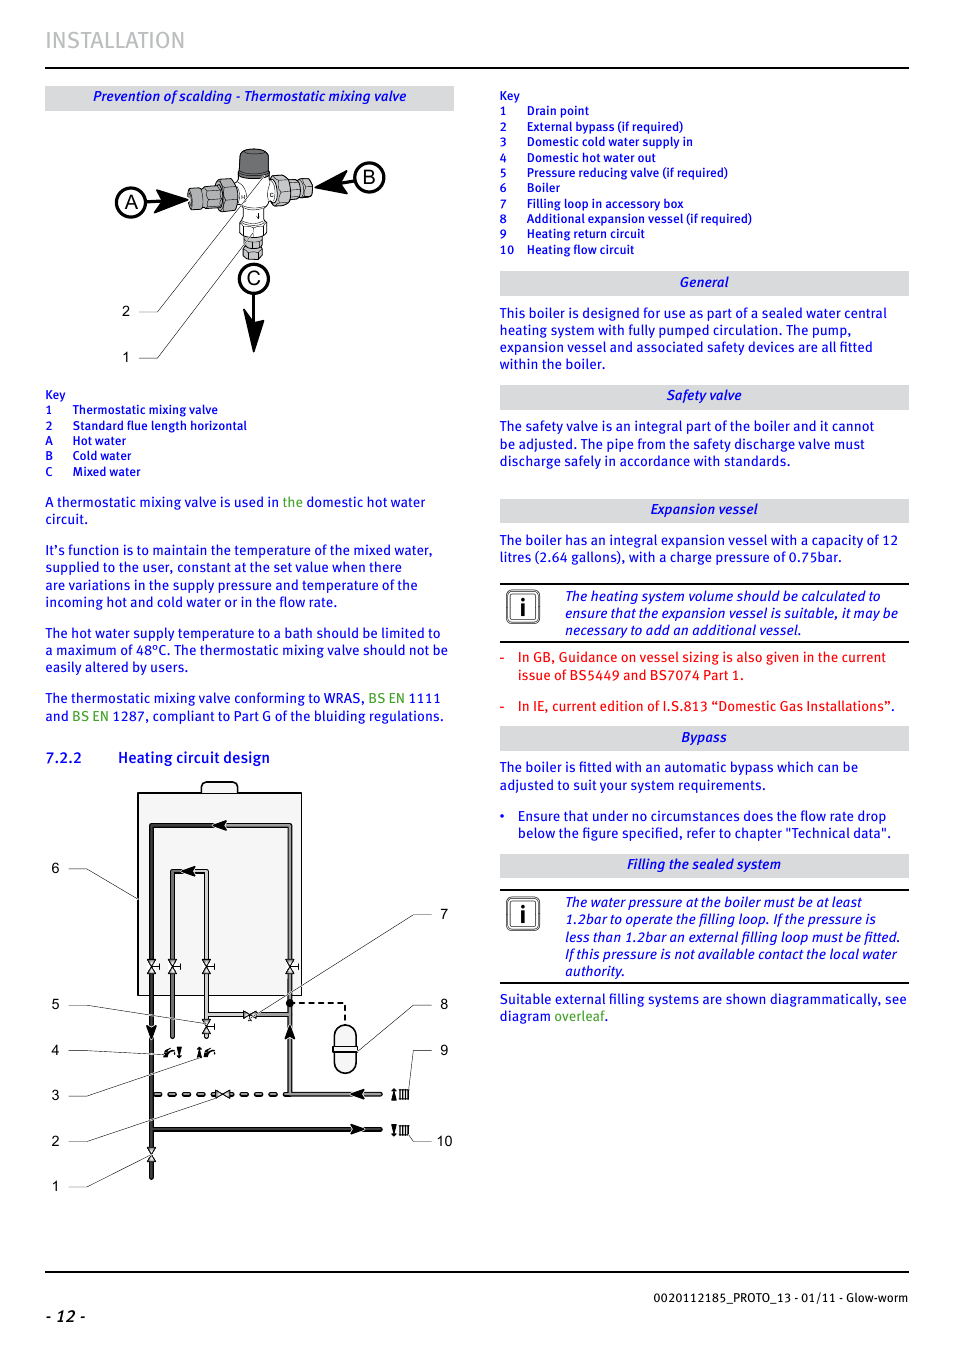 Installation, Ab c | Glow-worm Ultracom2 35 Store User Manual | Page 14 / 68